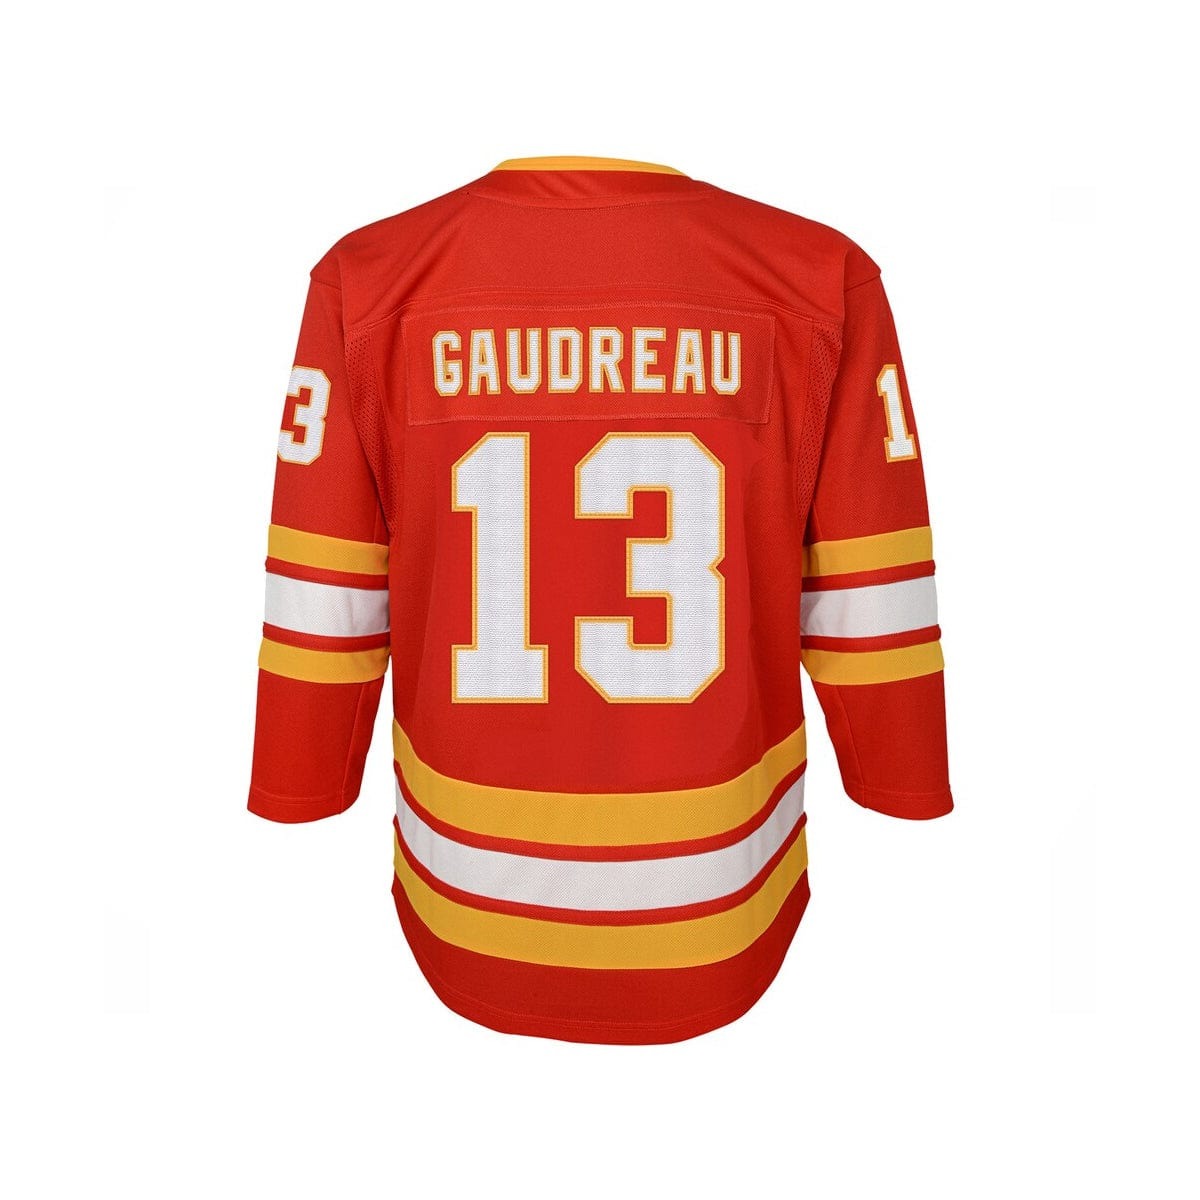 Calgary Flames Youth Home Premier Jersey - Red